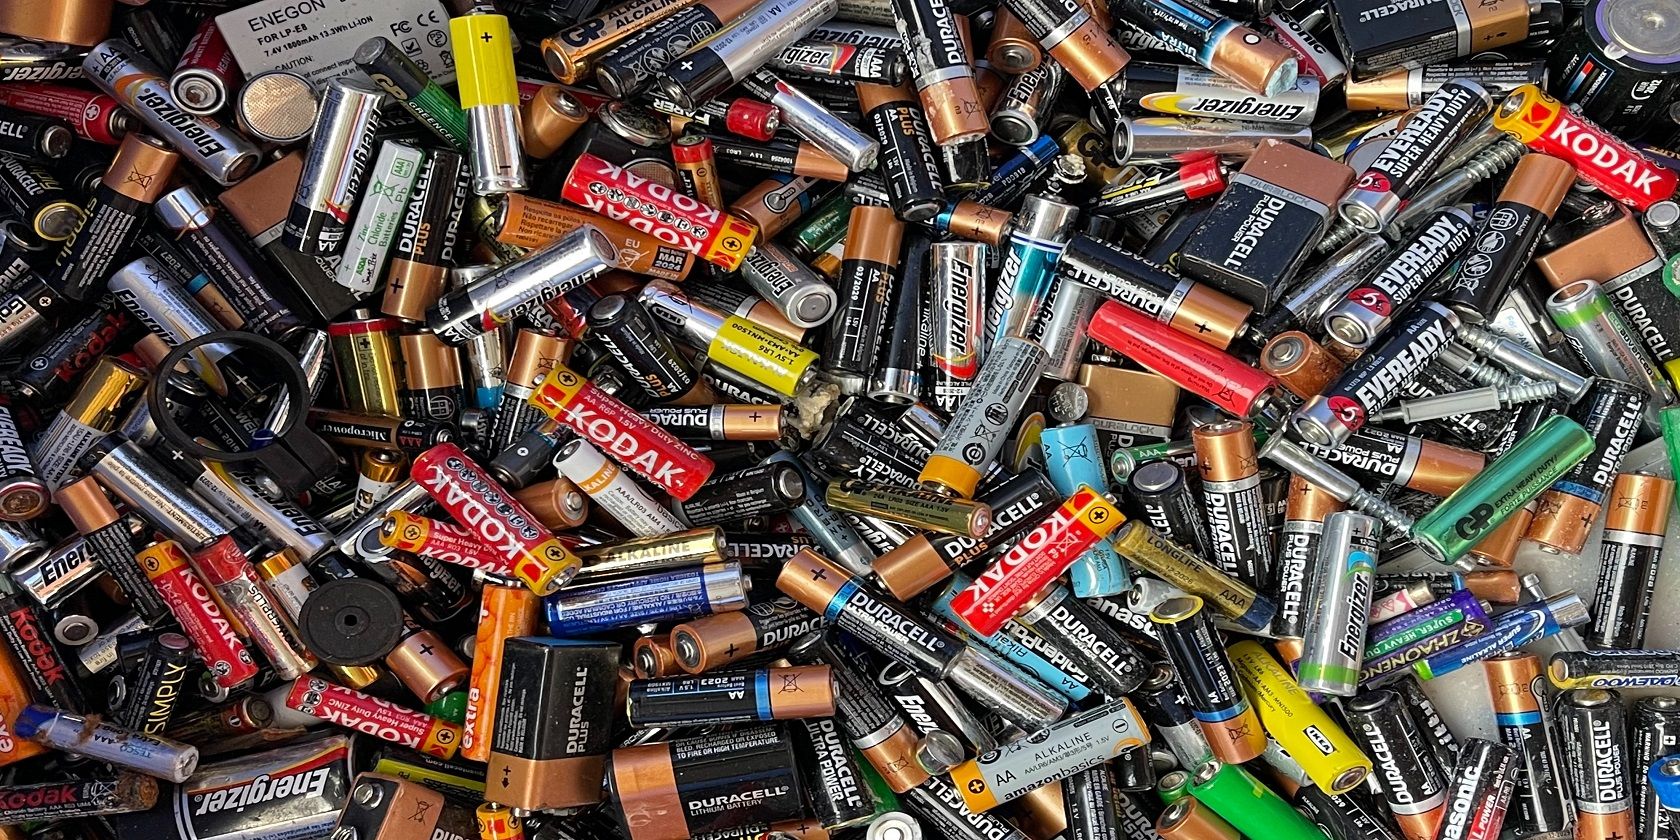 A collection of batteries awaiting recycling